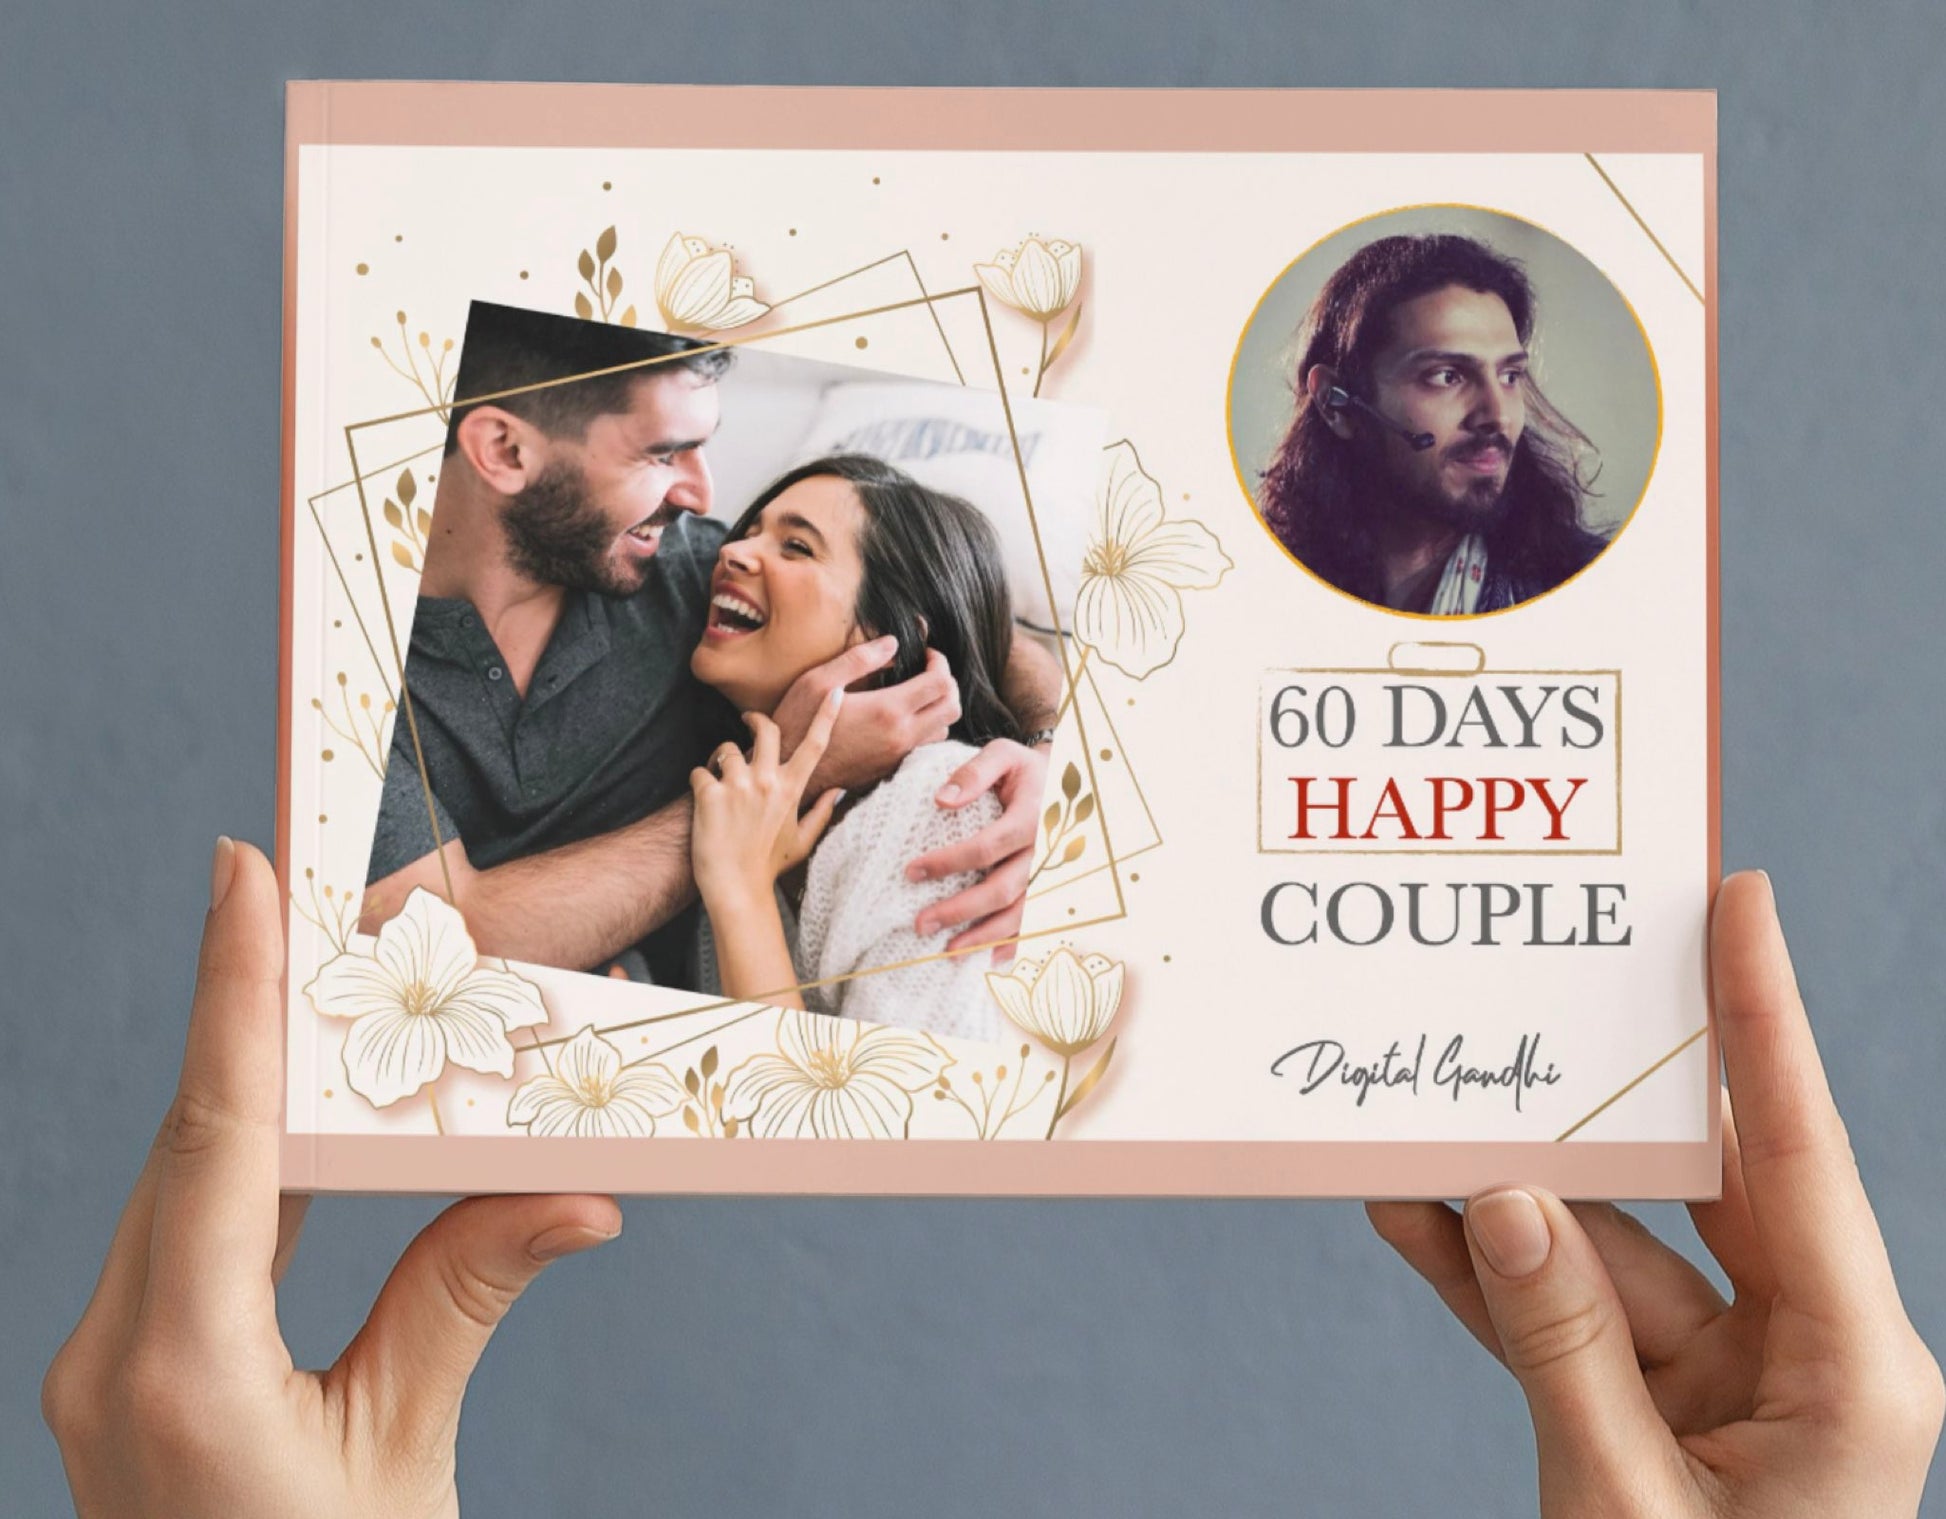 60 days Happy Relationship Program for Working Couples Printrove